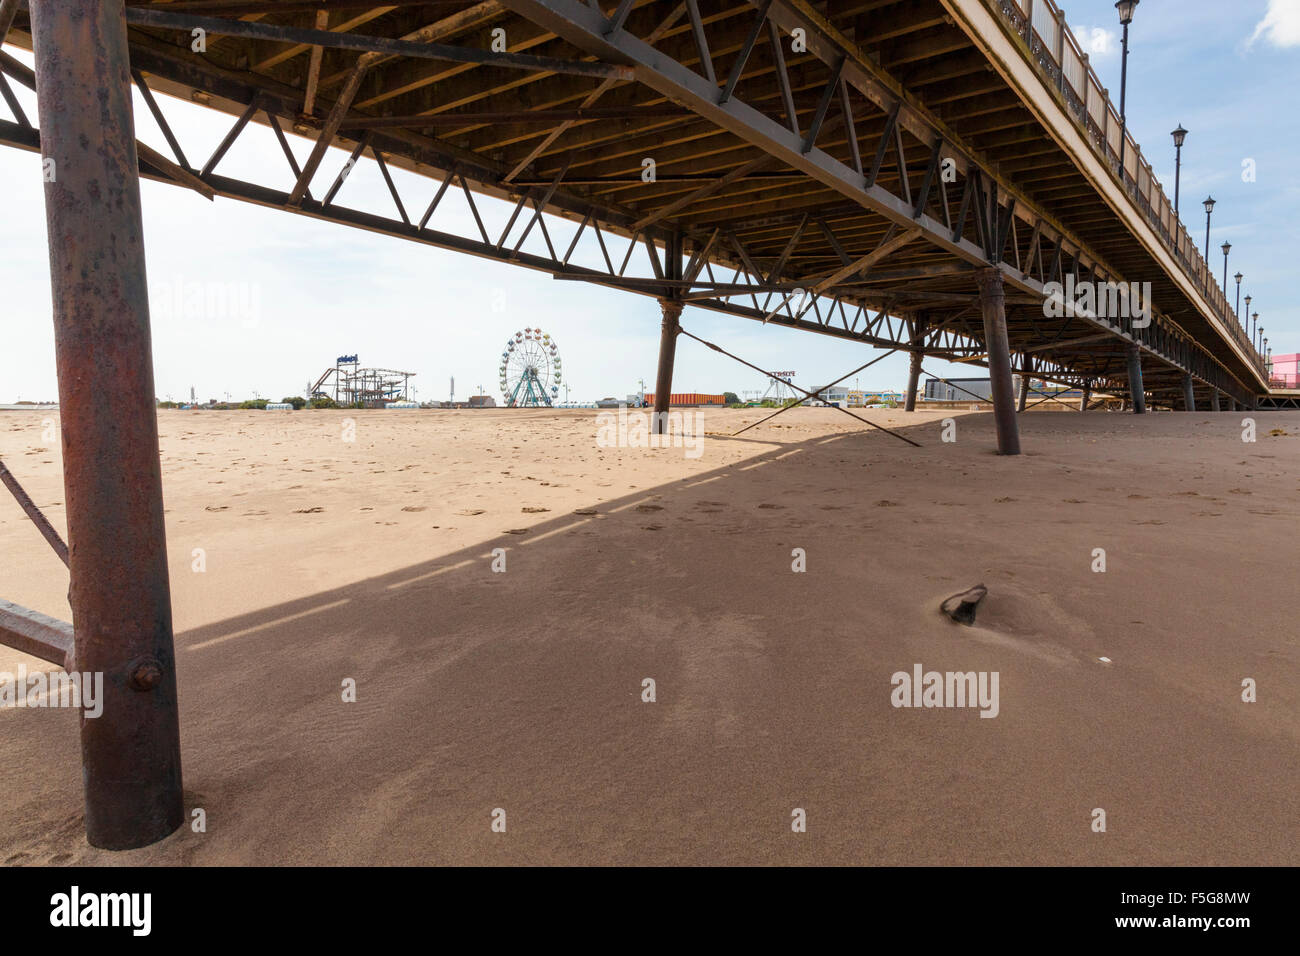 View from underneath Skegness Pier over the beach towards Pleasure Beach fairground, Skegness, Lincolnshire, England, UK Stock Photo